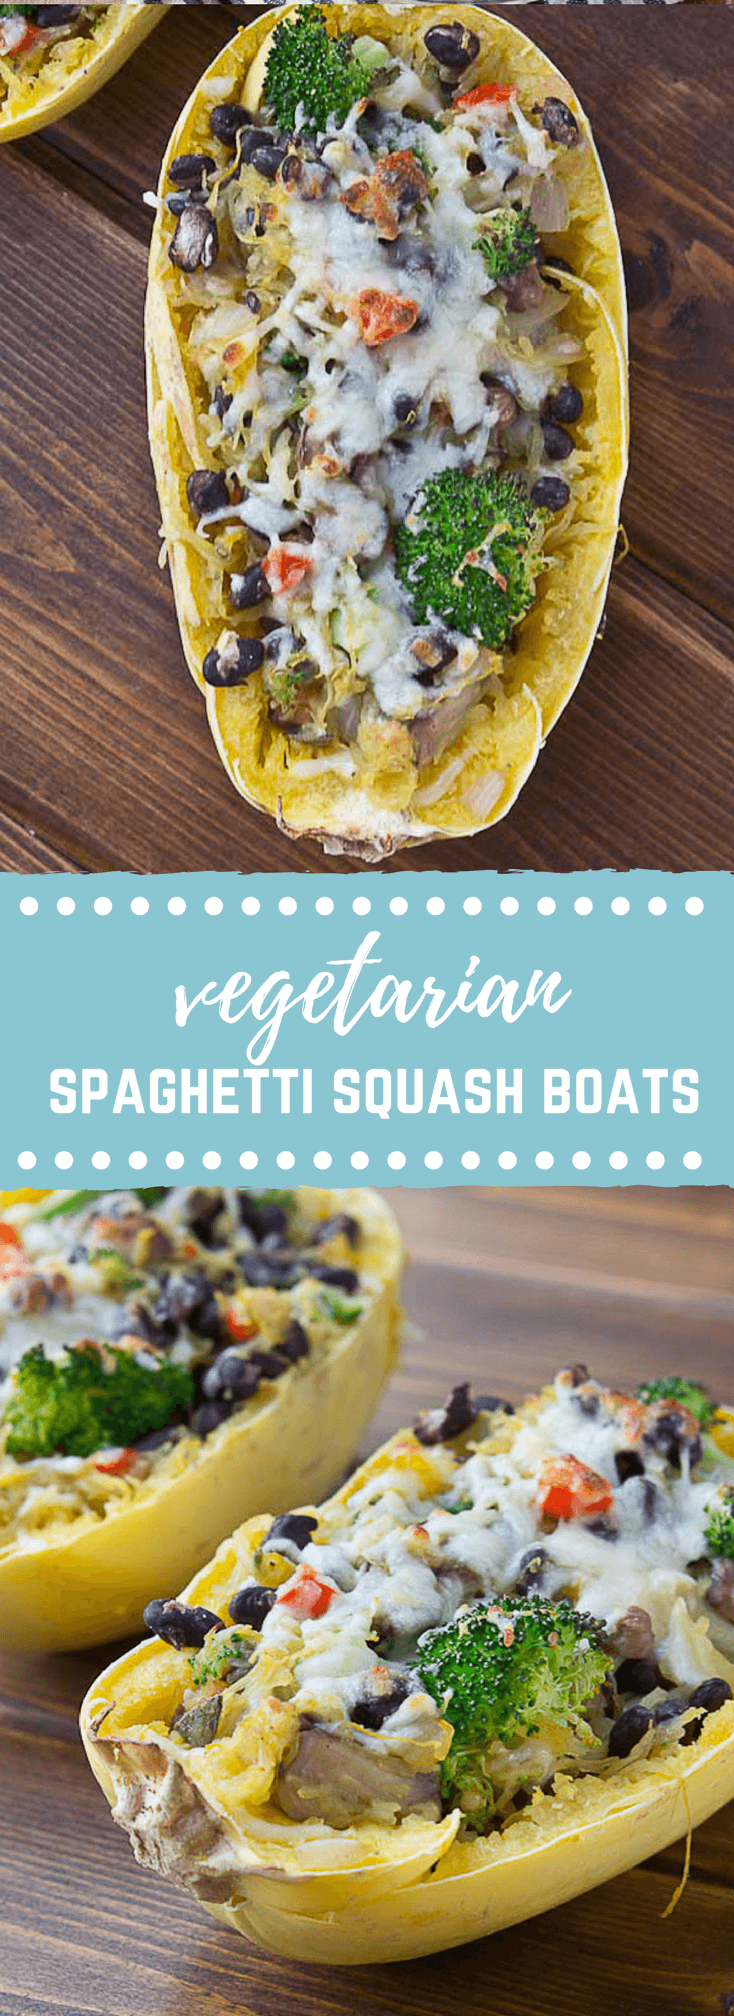 Vegetarian Spaghetti Squash Boats are the ultimate healthy comfort food made whole simple ingredients just right for a weeknight. 